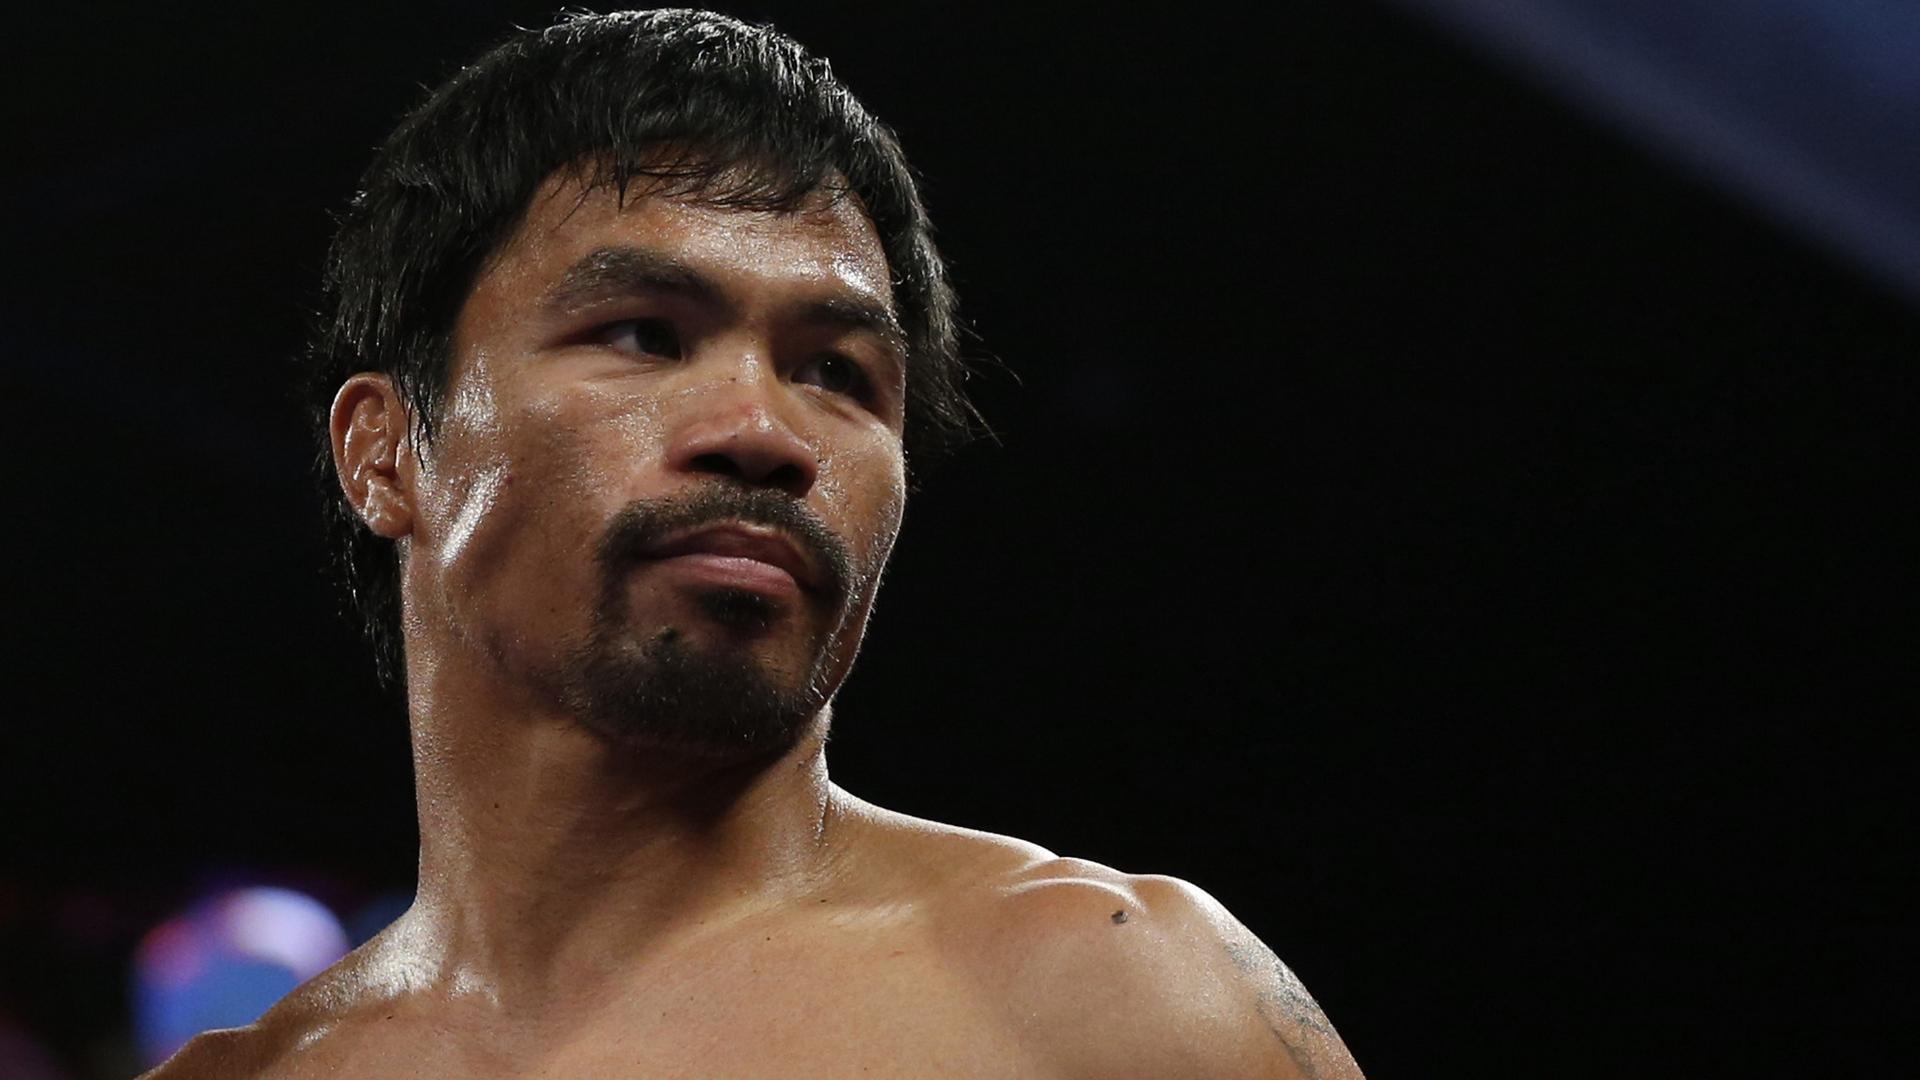 Download wallpaper 1920x1080 manny pacquiao, boxer, champion